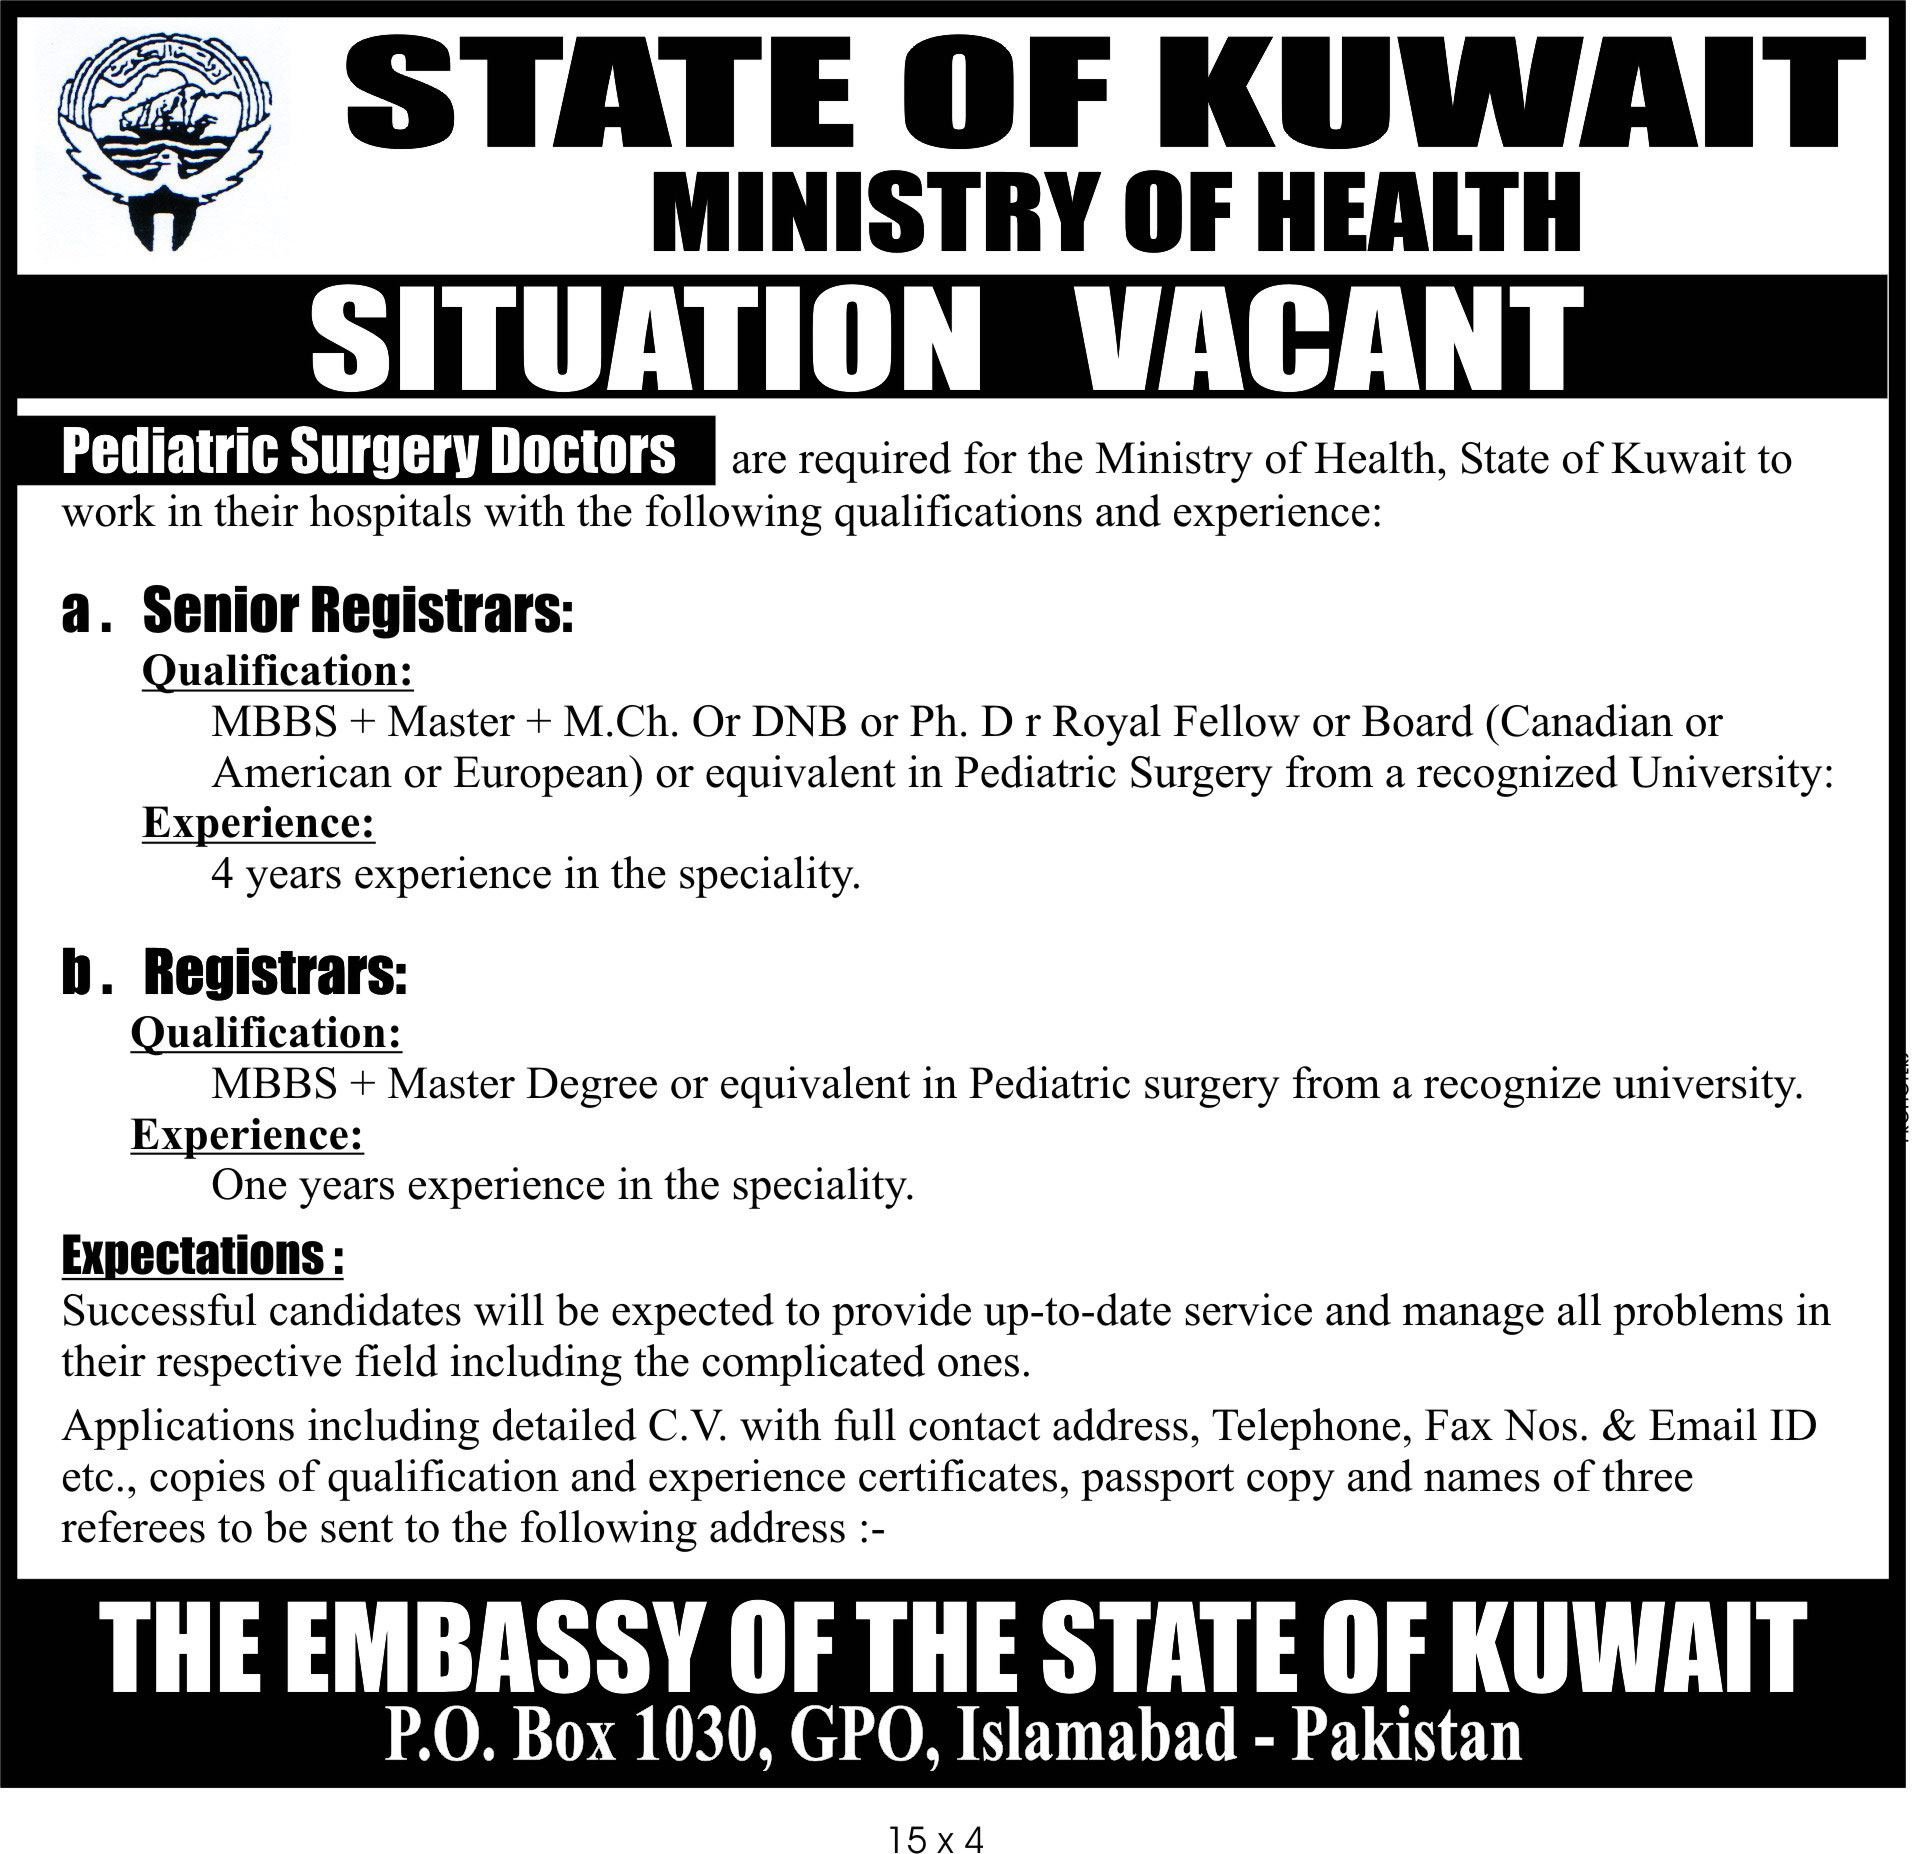 Pediatric Surgery Doctors for Ministry of Health Kuwait